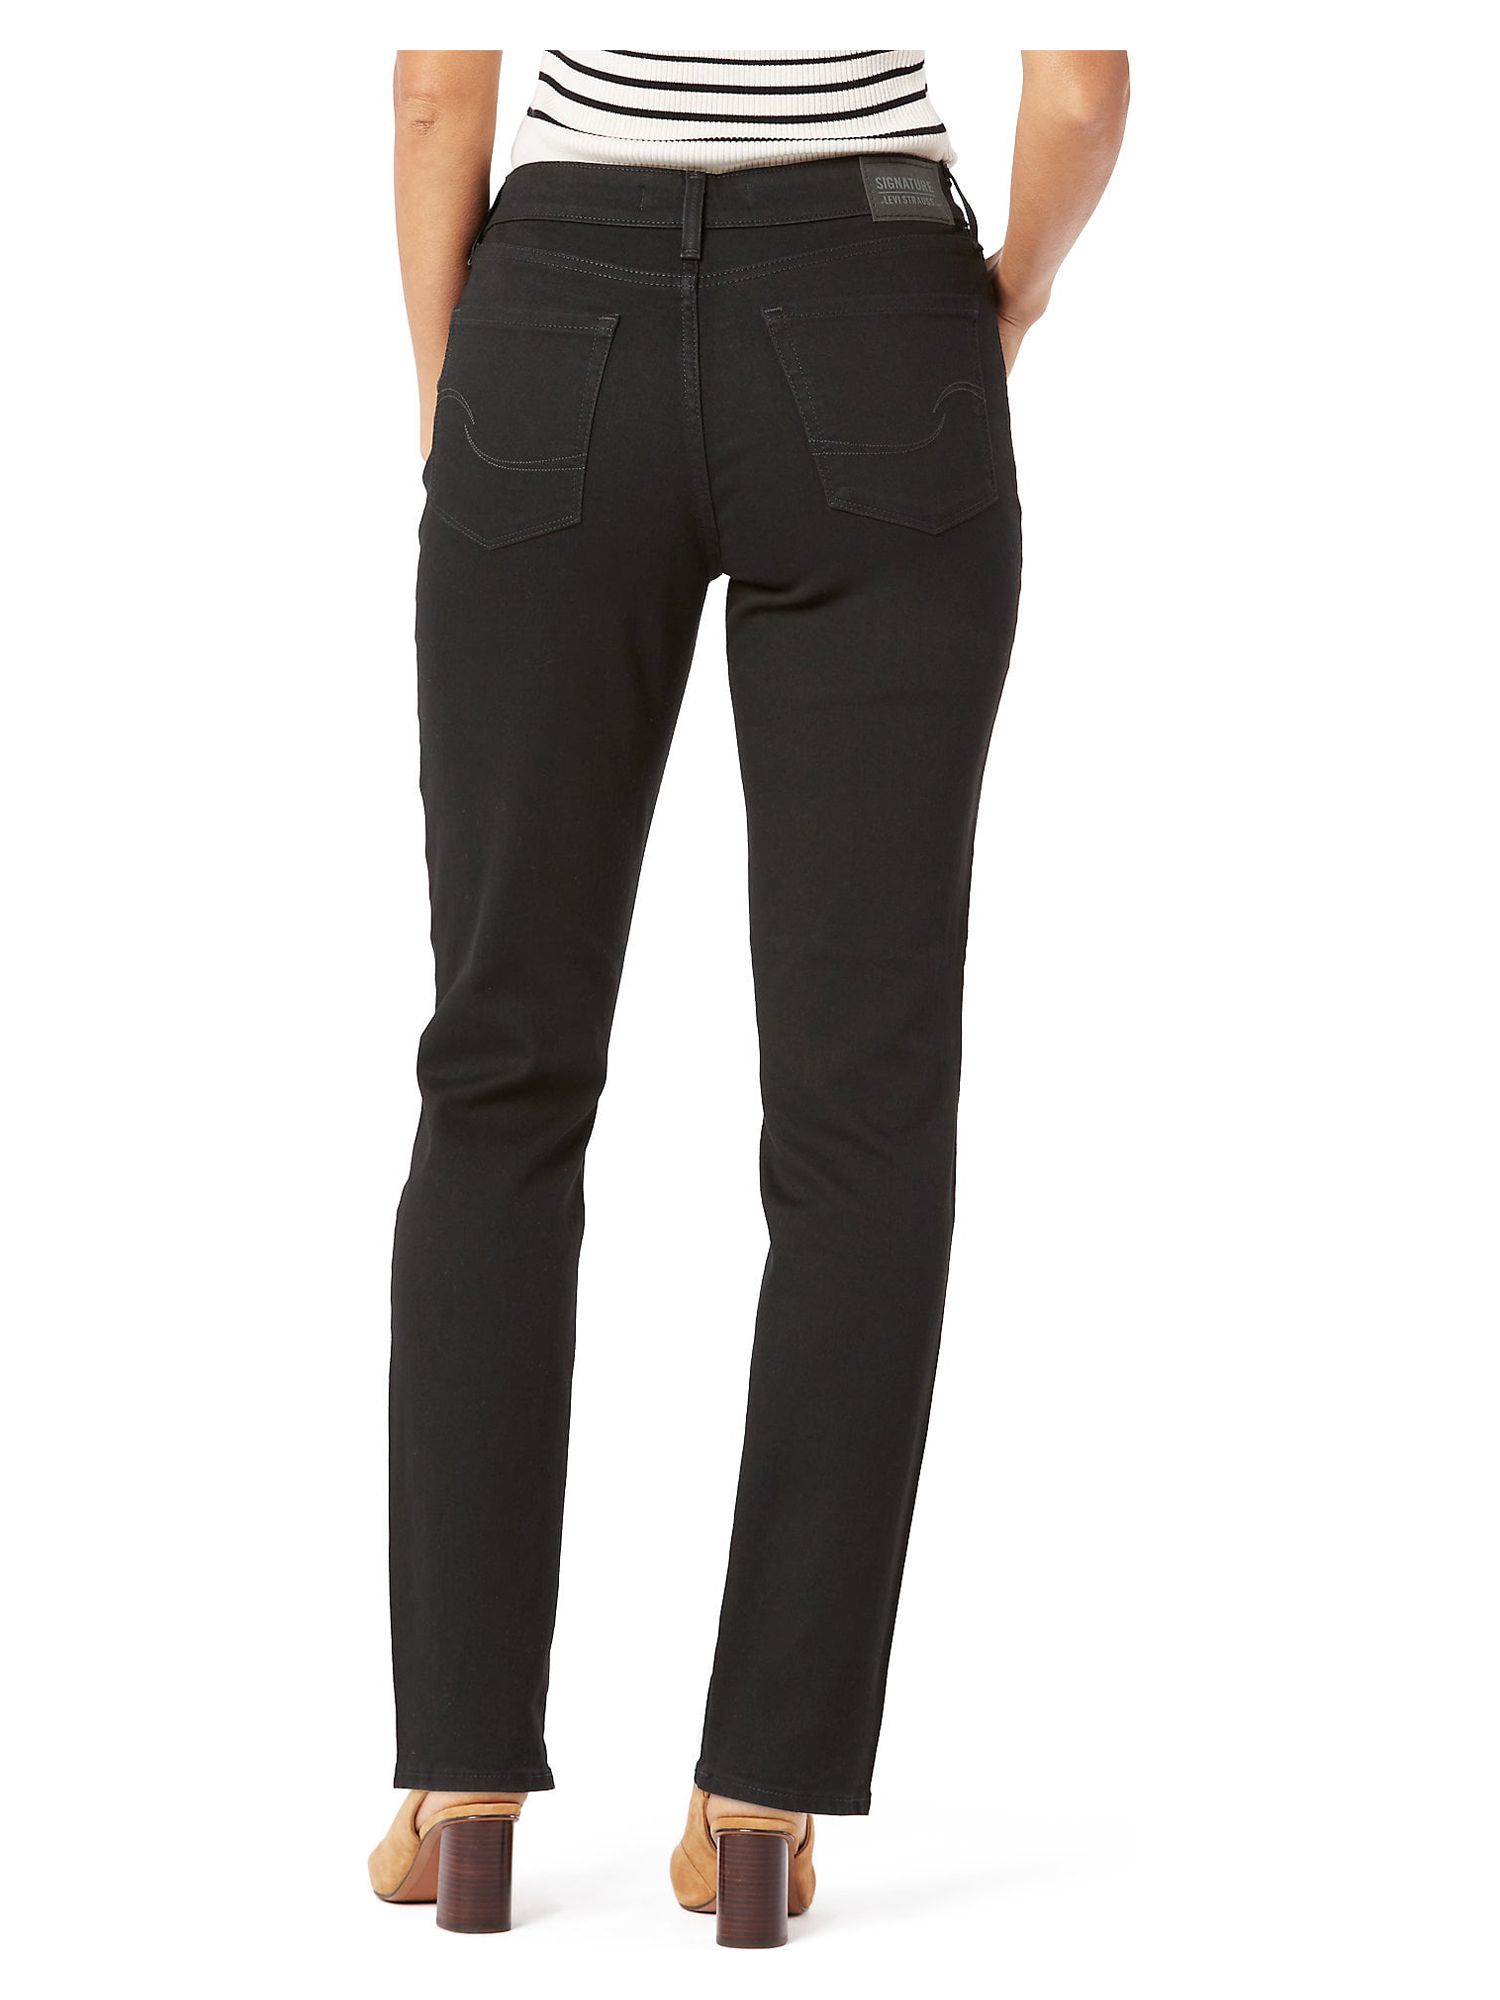 Signature by Levi Strauss & Co. Women's and Women's Plus Size Mid Rise Modern Straight Jeans, Sizes 2-28 - image 2 of 5